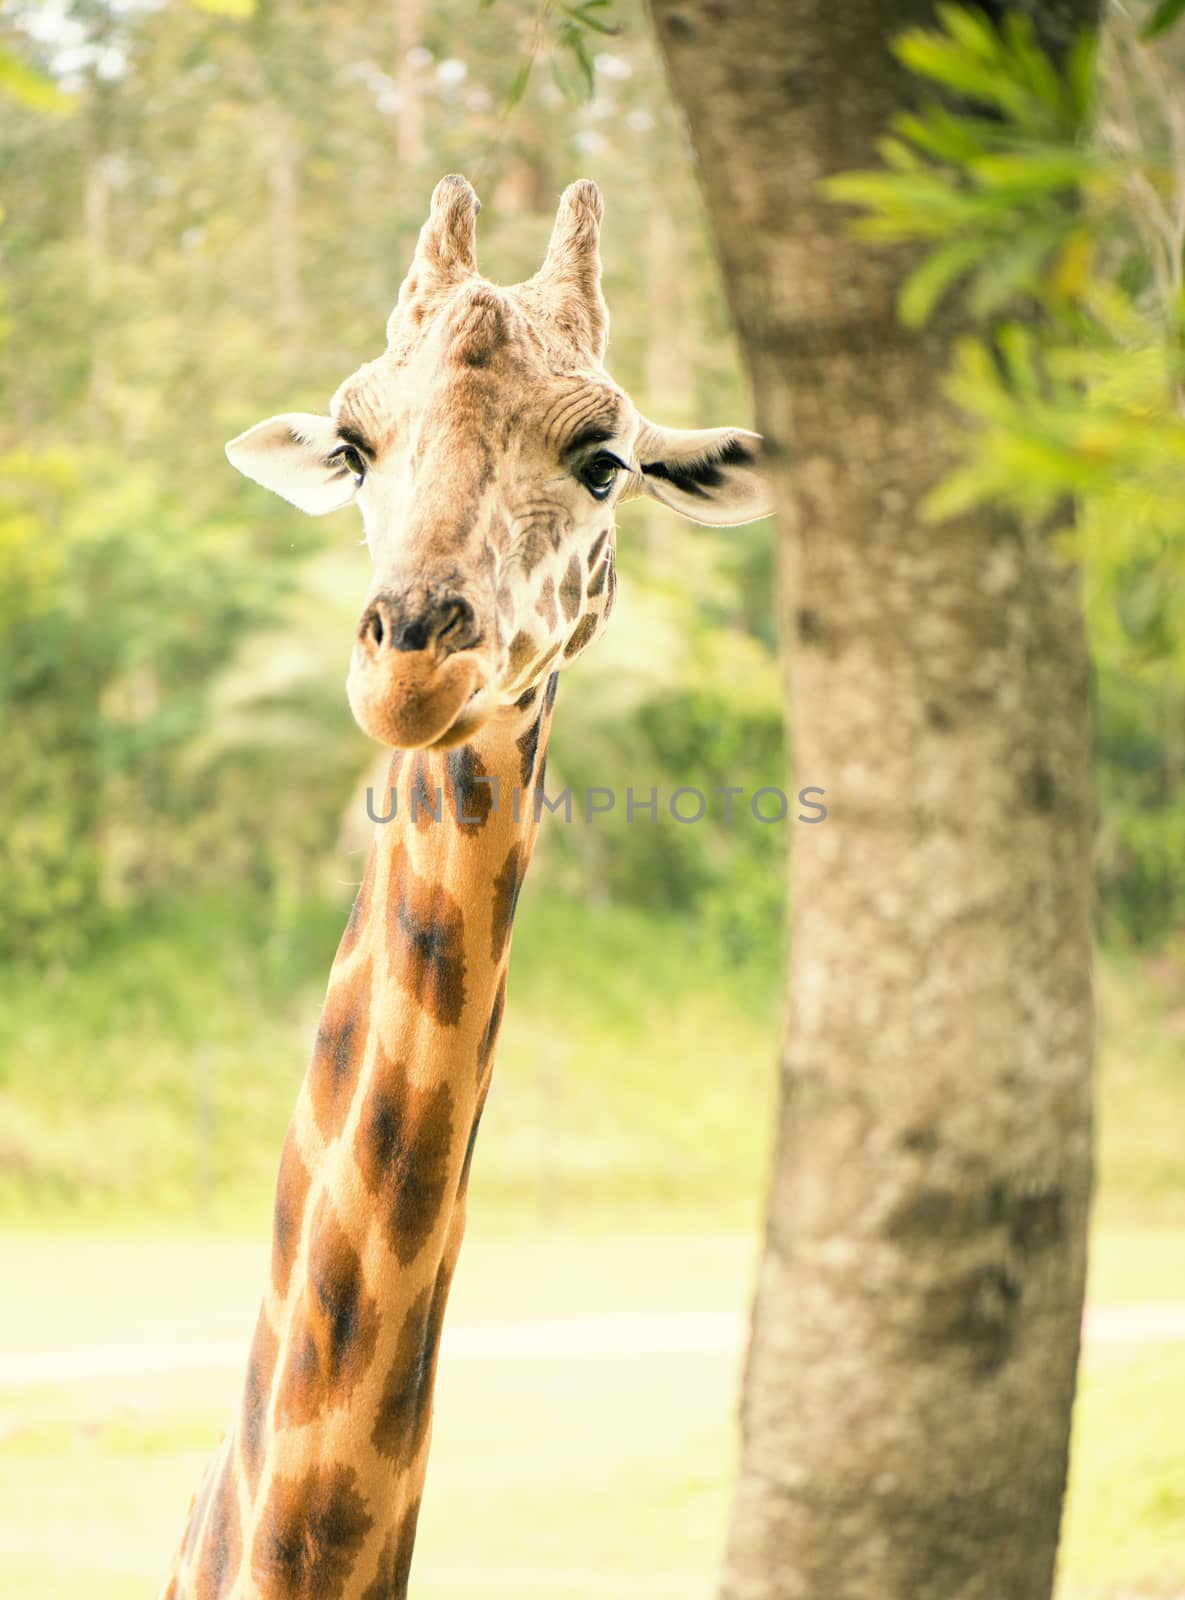 Large giraffe looking for food during the daytime.